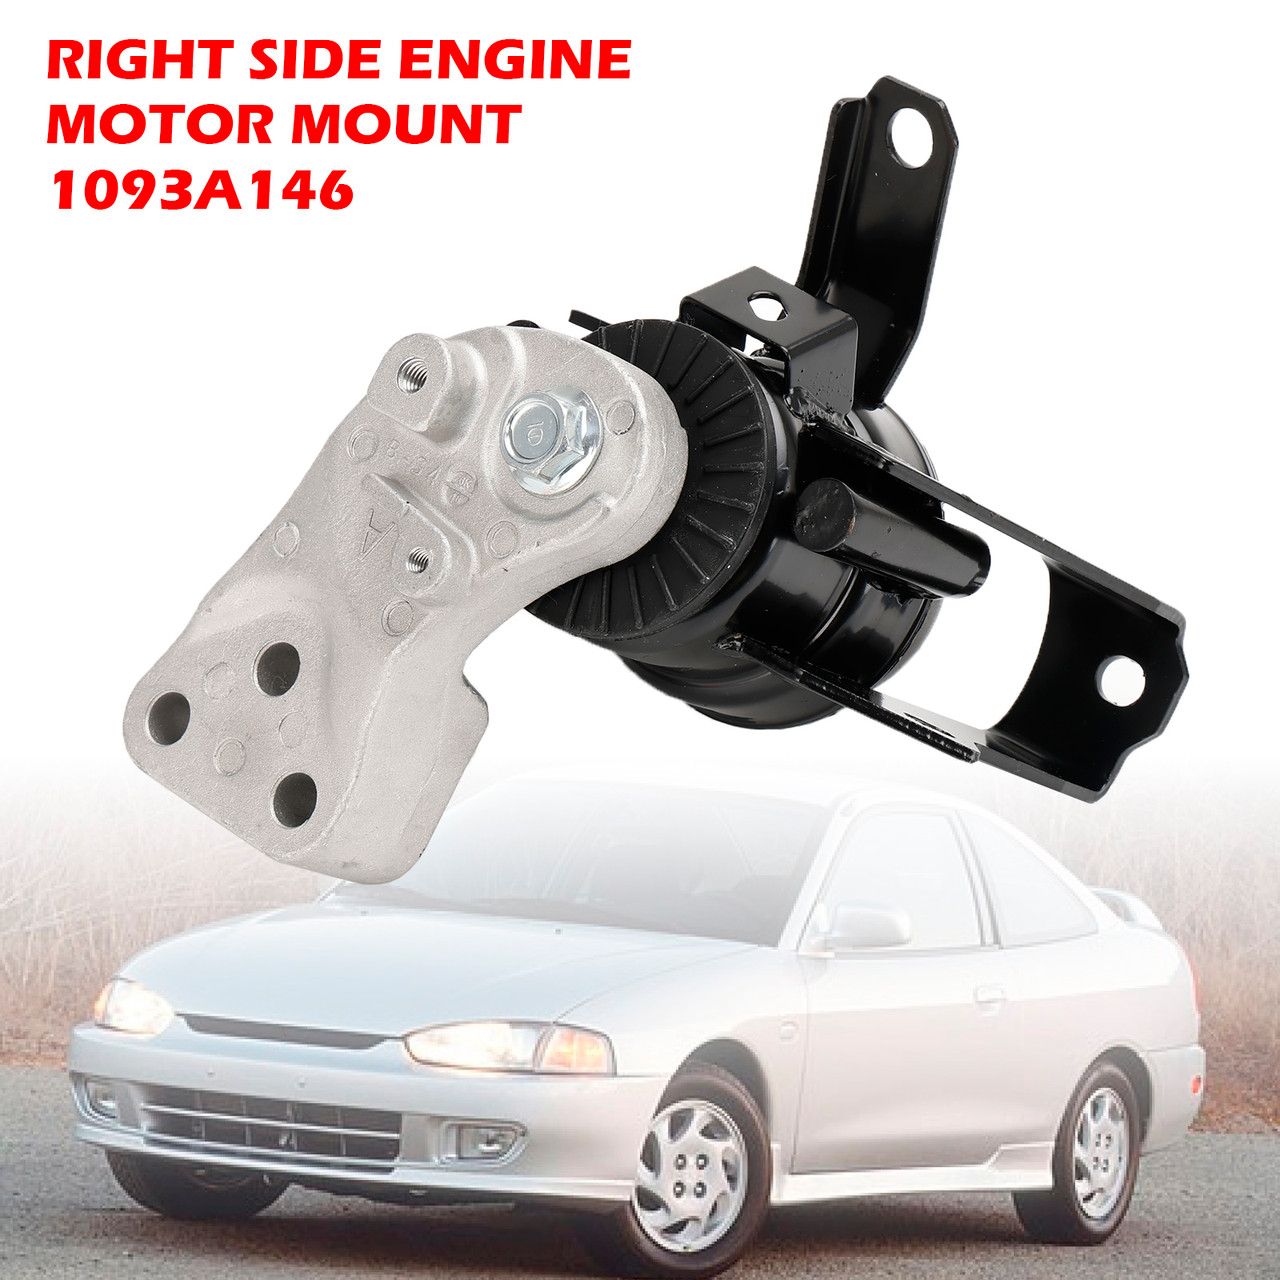 Right Side Engine Motor Mount 1093A146 For Mitsubishi Mirage/G4 2014-2018